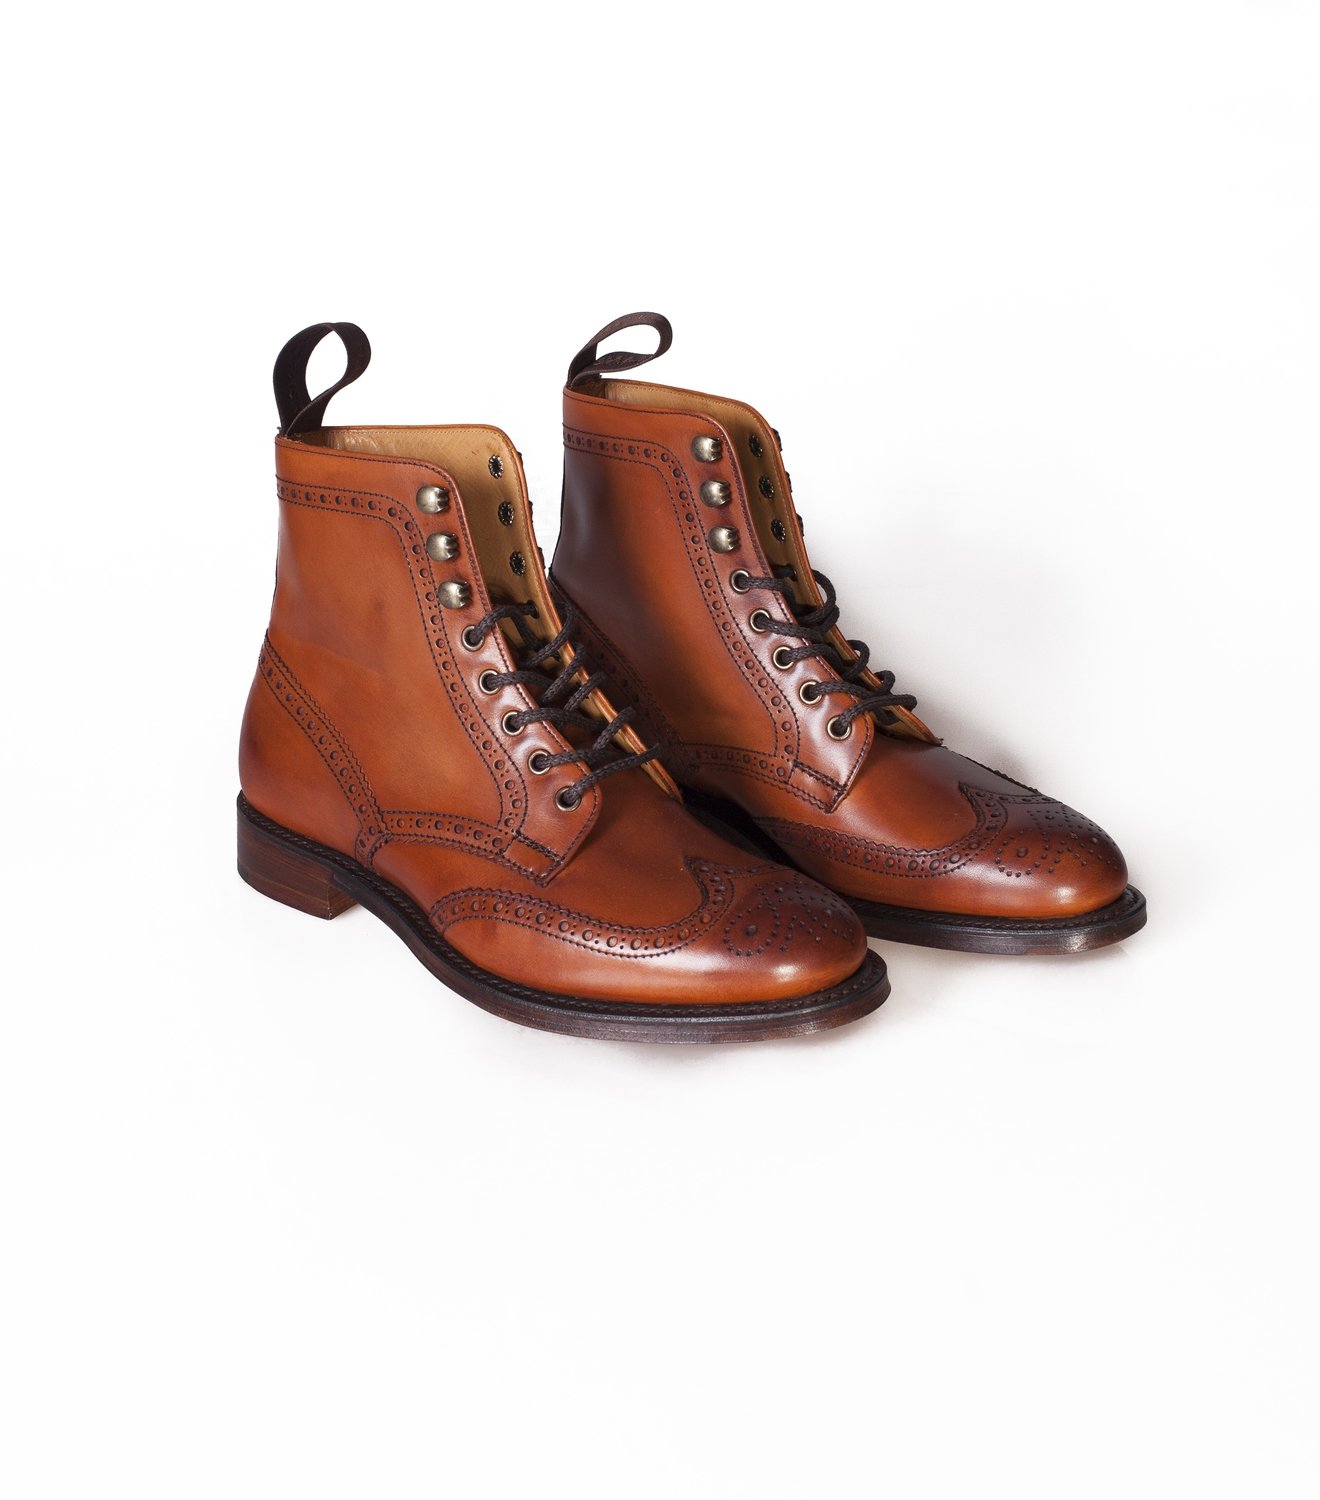 Cheaney Olivia 11 Brogue Boots